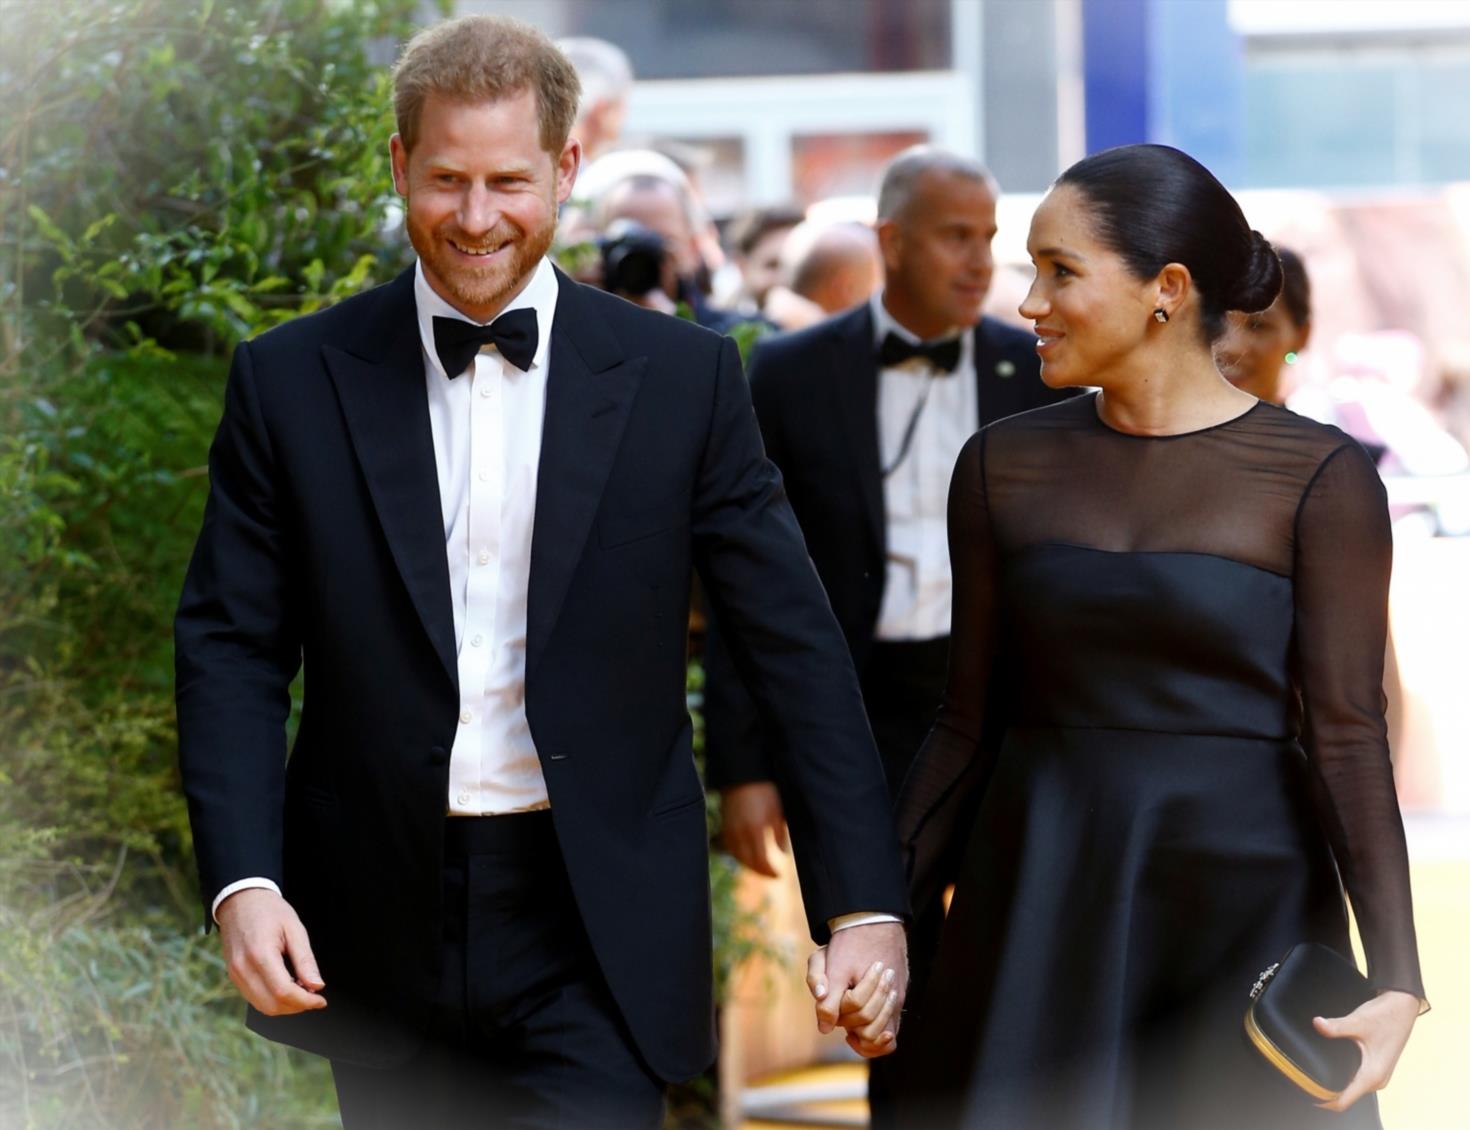 Discrepancies Emerge Over Prince Harry and Meghan Markles AllegedciHmmMy 4